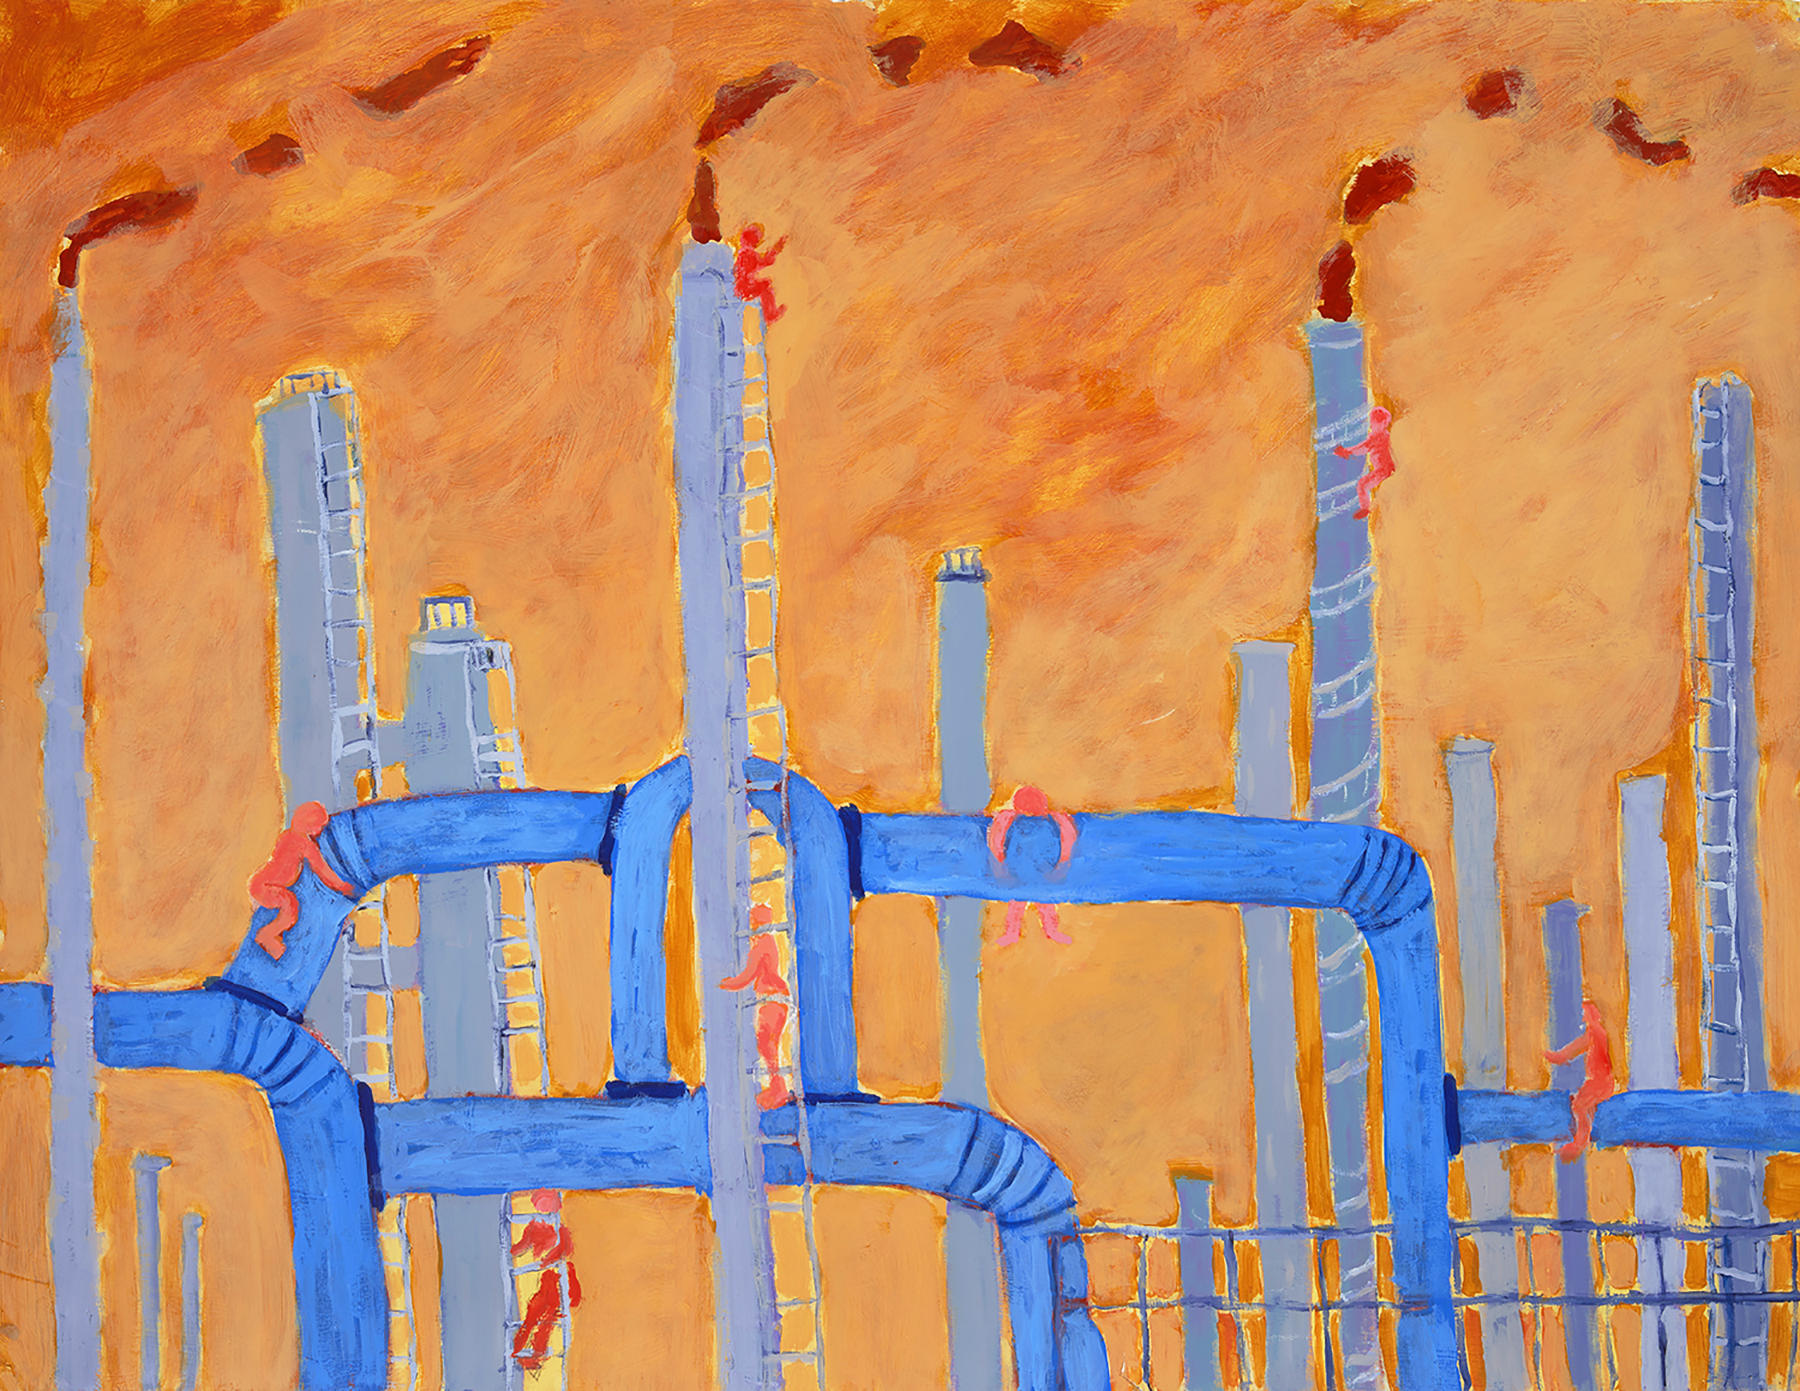 Pollution Playground by Mary Lesser: Painting of connected smoke stacks with a few people climbing on them